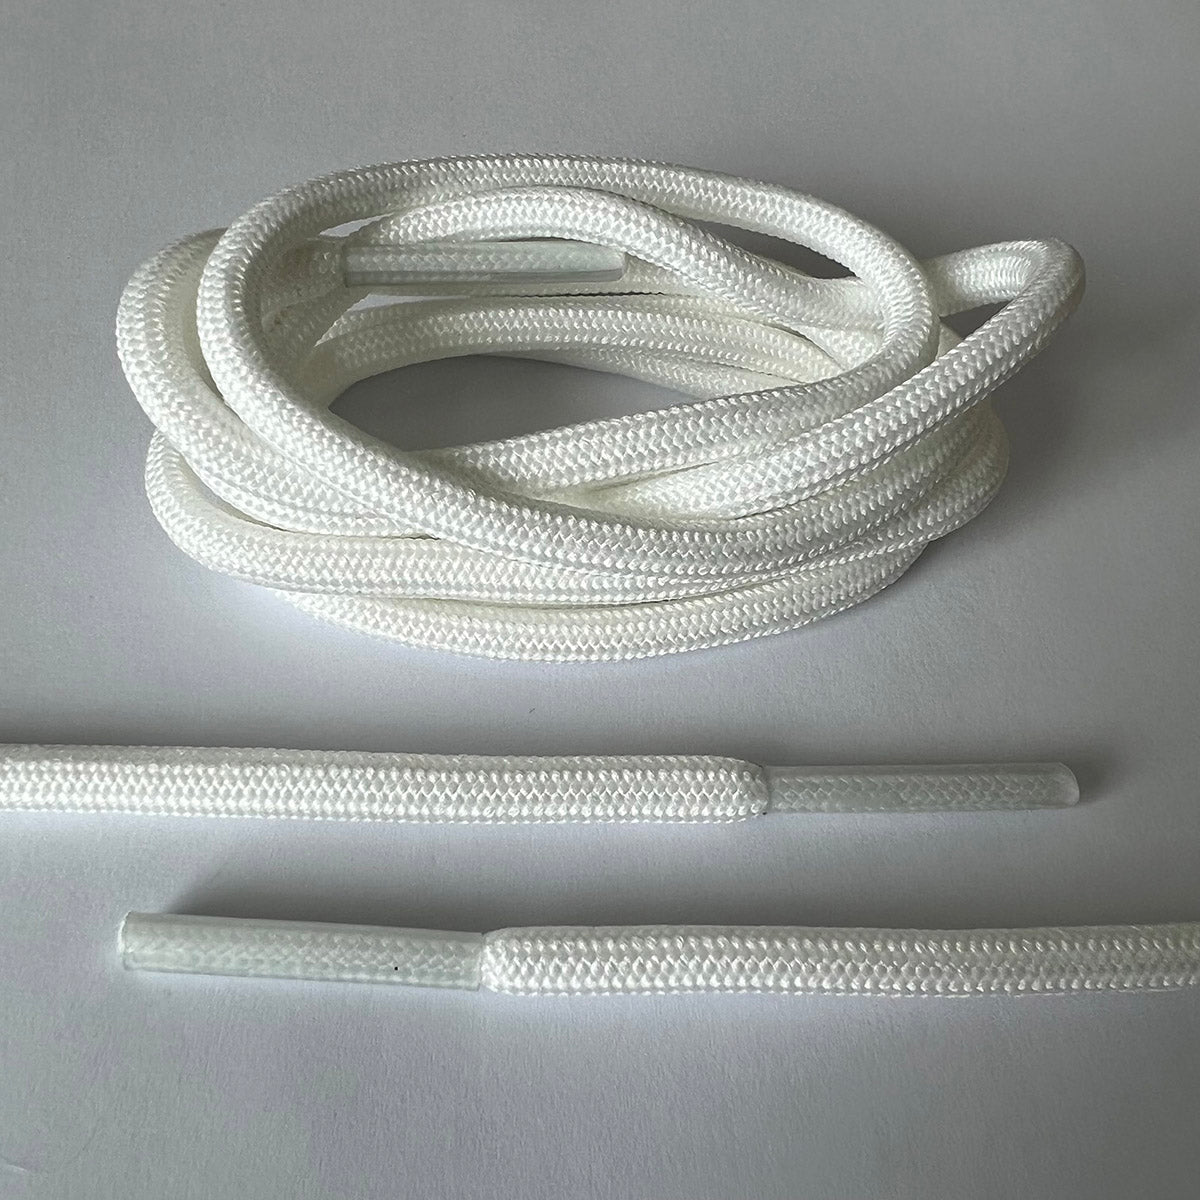 Black/White Rope Laces, Yeezy Rope Laces, Yeezy Laces